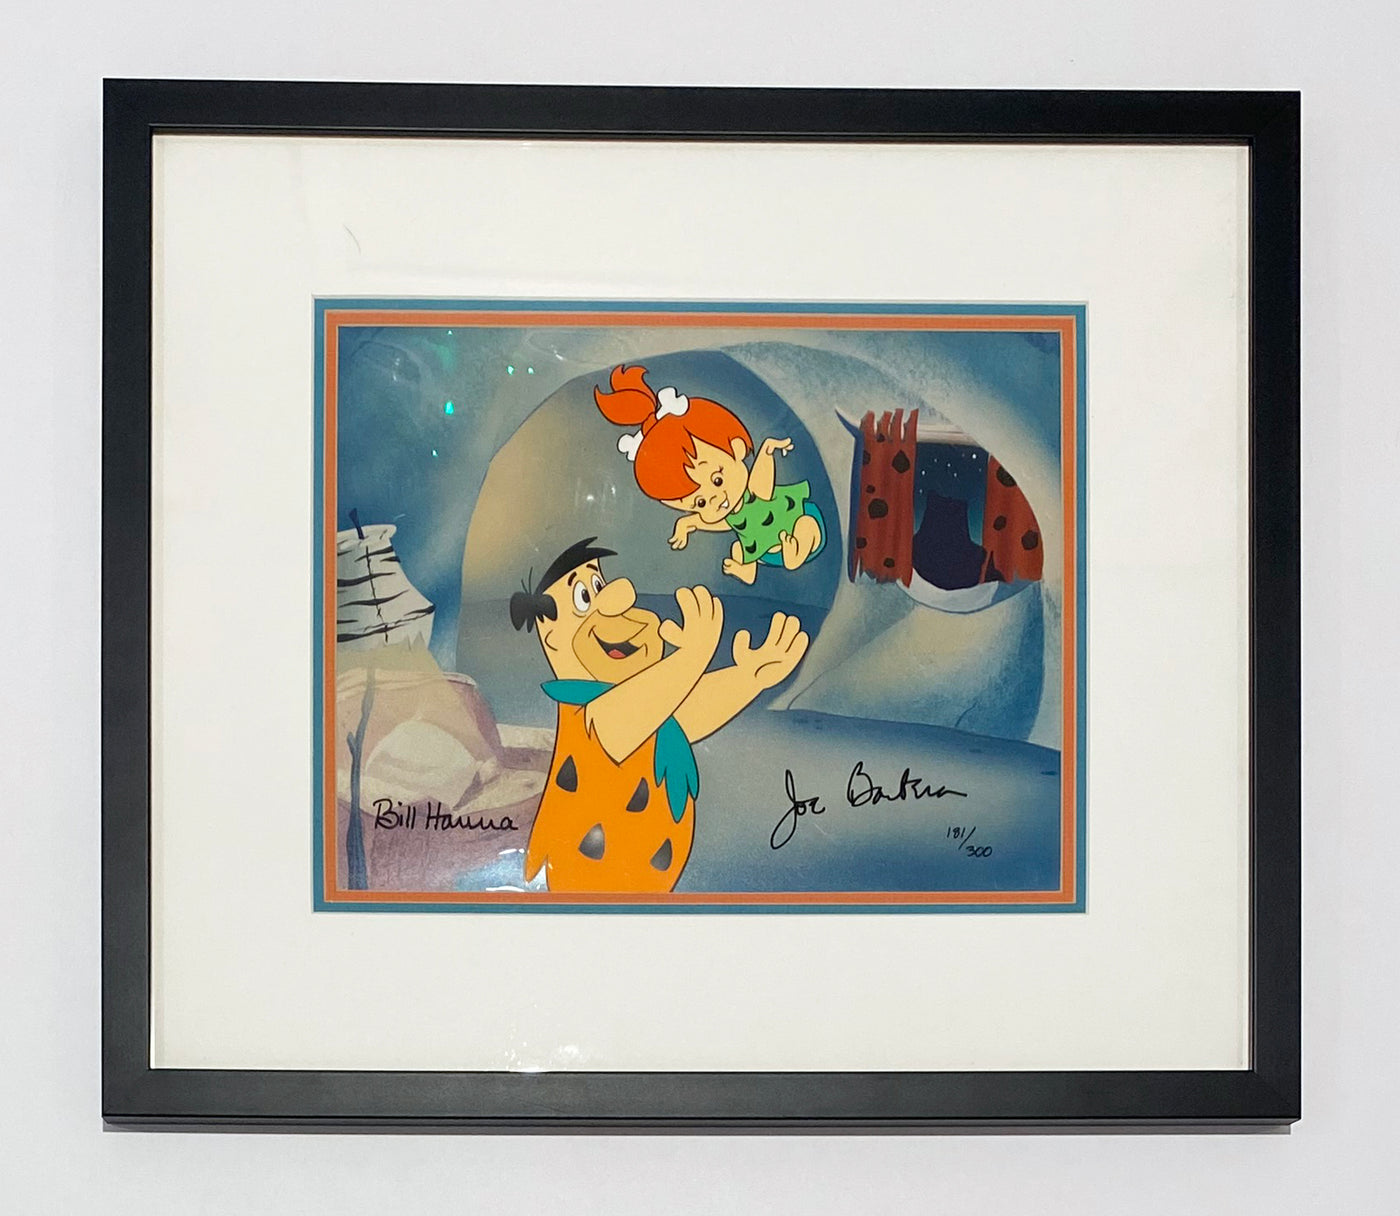 Original Hanna Barbera Limited Edition Cel "Tossing Pebbles" featuring Fred Flintstone and Pebbles, Signed by Bill Hanna and Joe Barbera